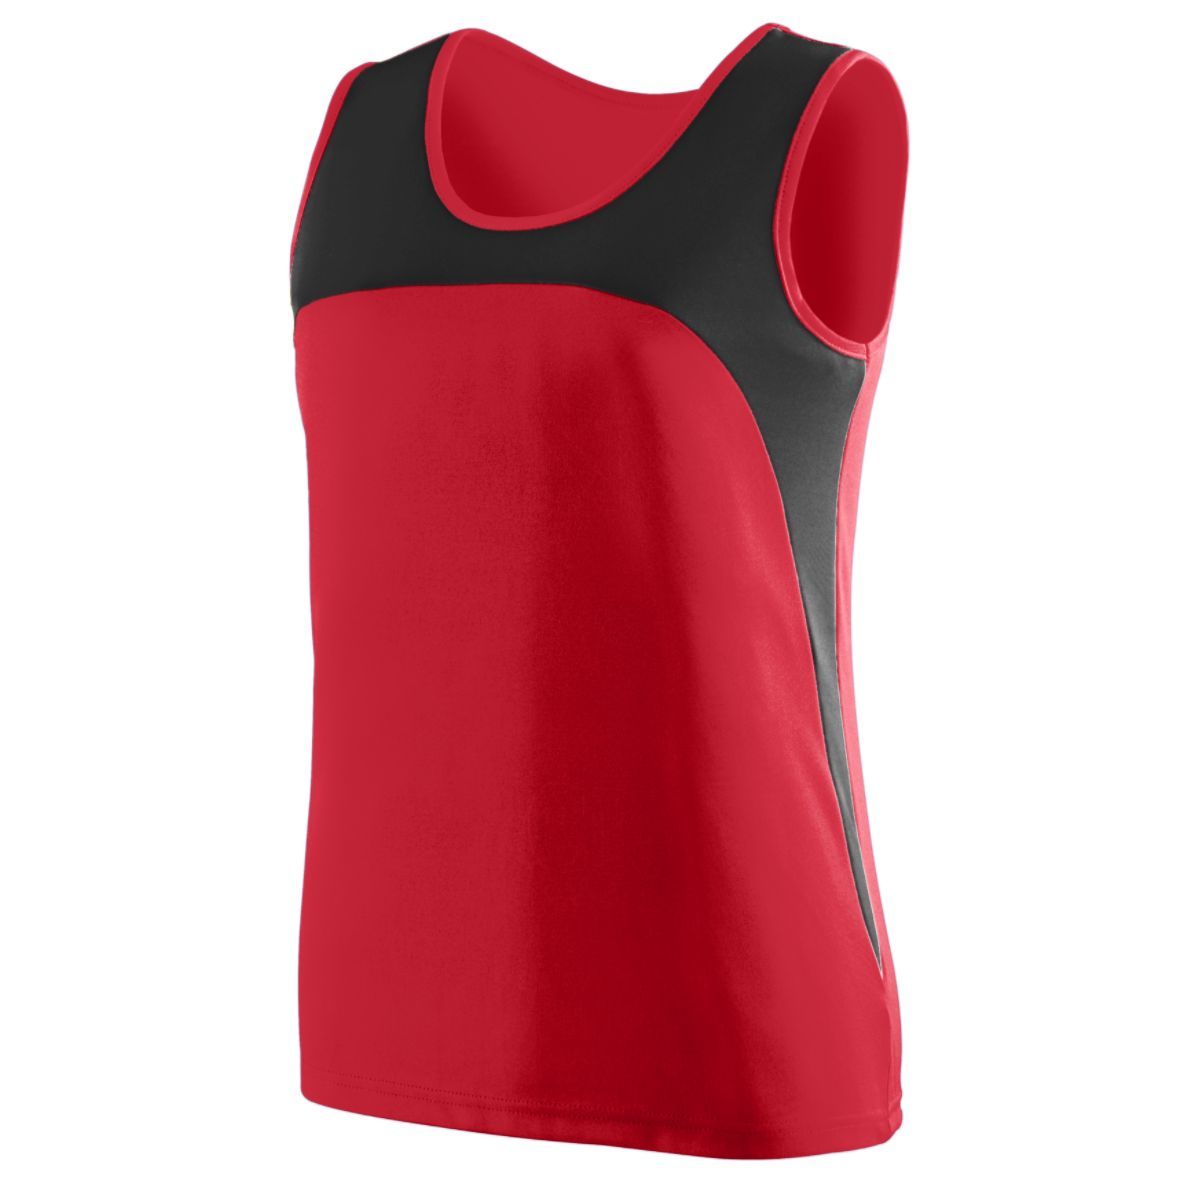 Augusta Sportswear Ladies Rapidpace Track Jersey in Red/Black  -Part of the Ladies, Ladies-Jersey, Augusta-Products, Track-Field, Shirts product lines at KanaleyCreations.com